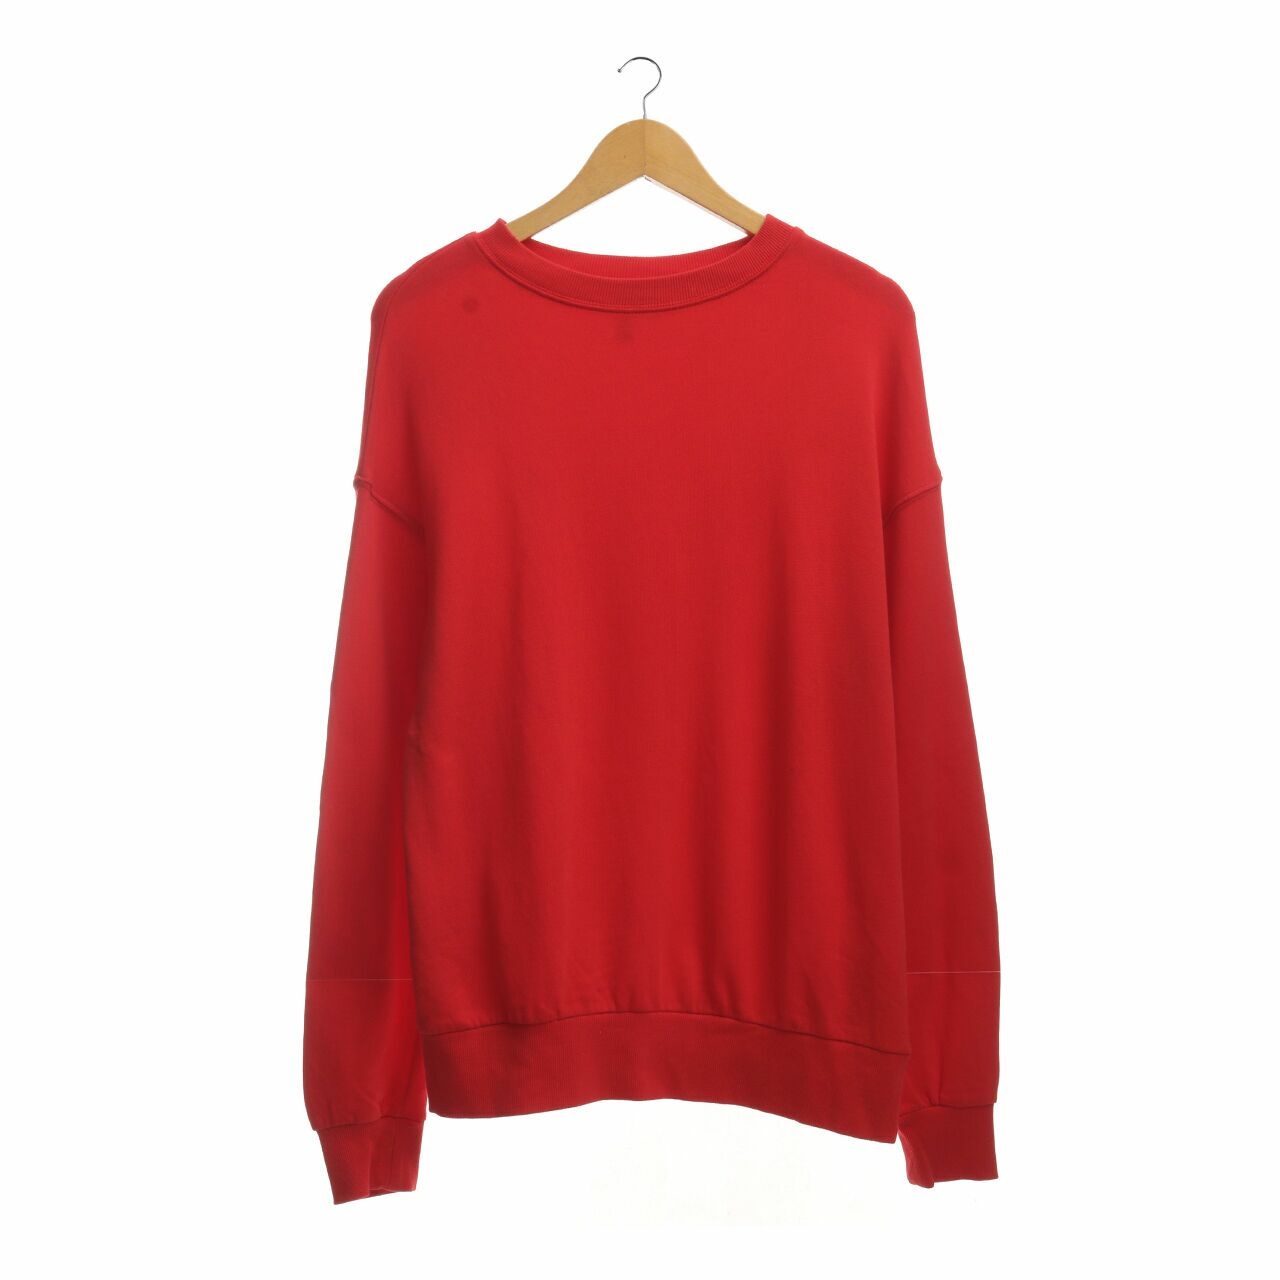 H&M Red Sweater